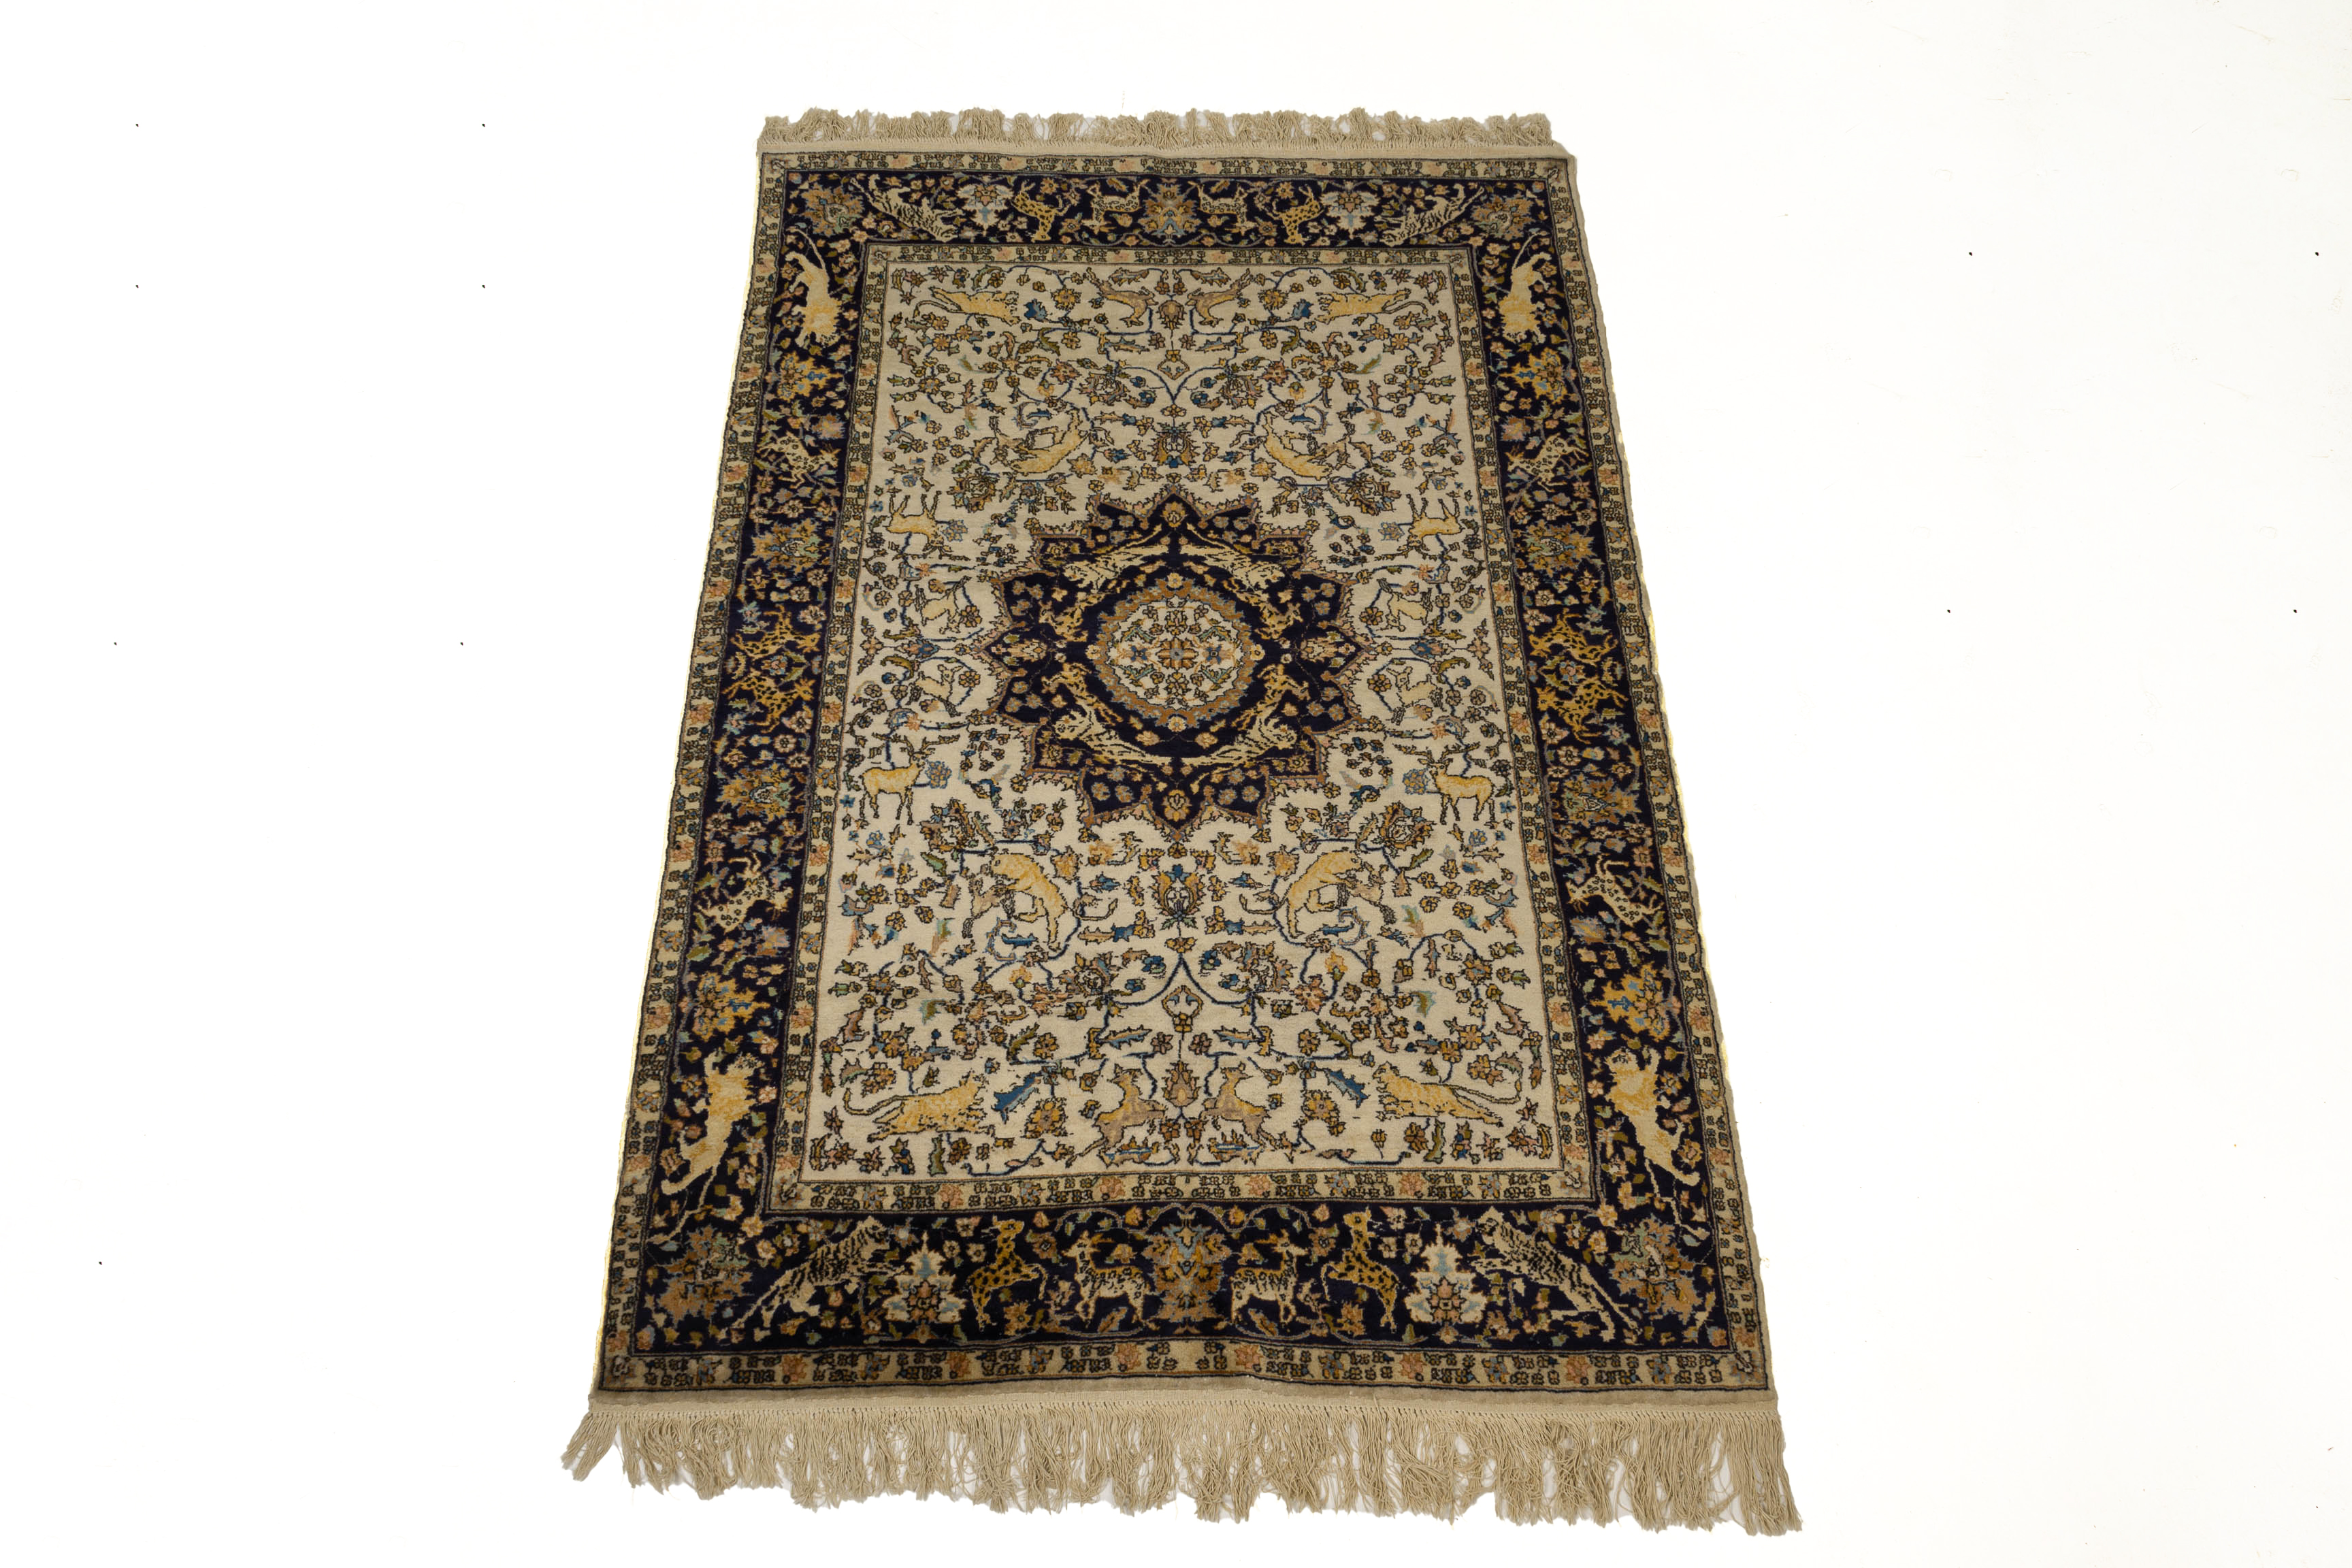 A MIDDLE EASTERN BLUE AND IVORY RUG